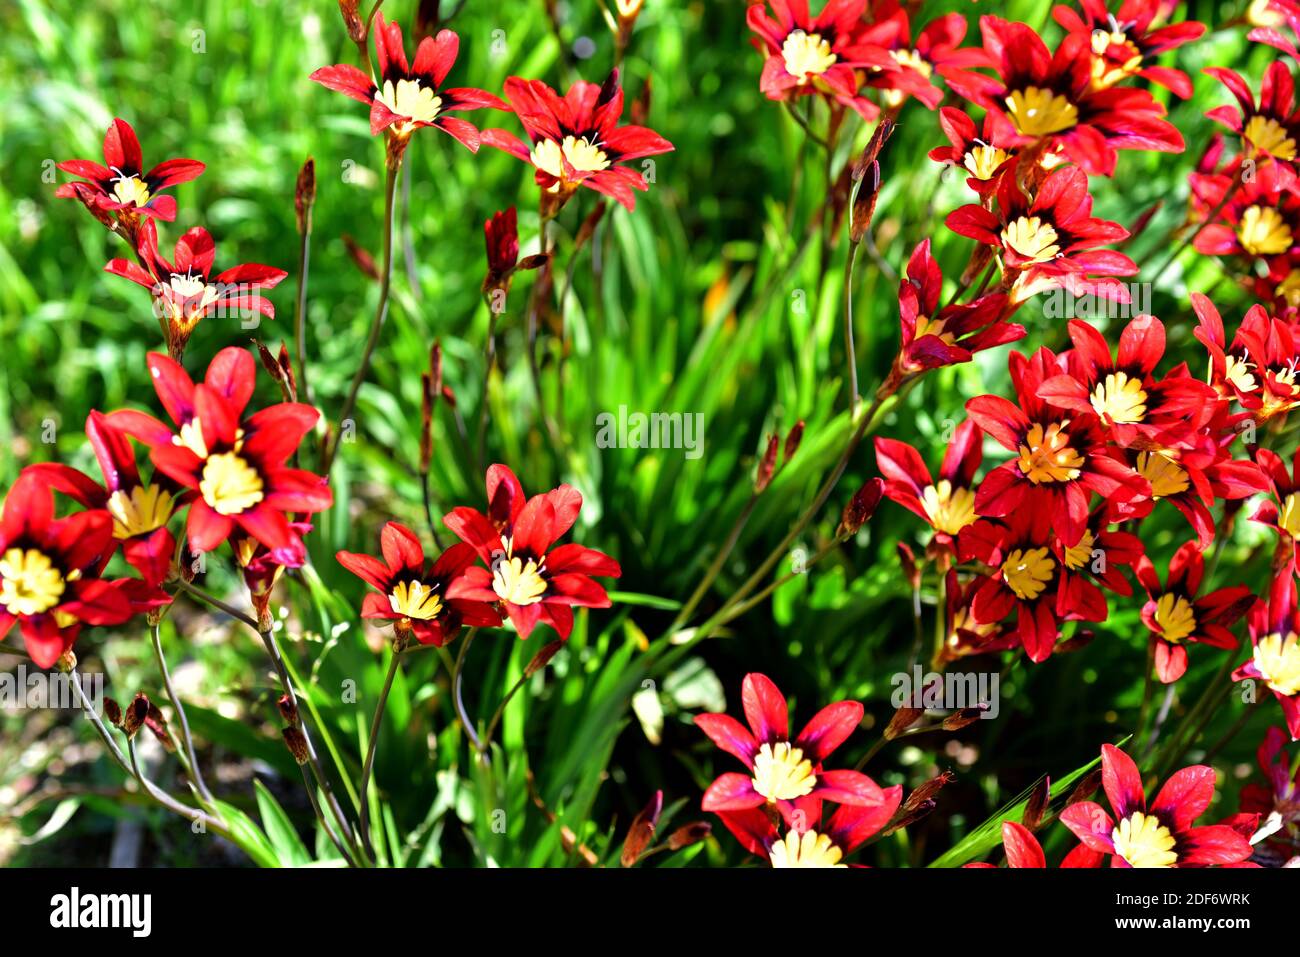 Harlequin flower or wandflower (Sparaxis tricolor) is an ornamental perennial plnat native to South Africa. Flowers detail. Stock Photo